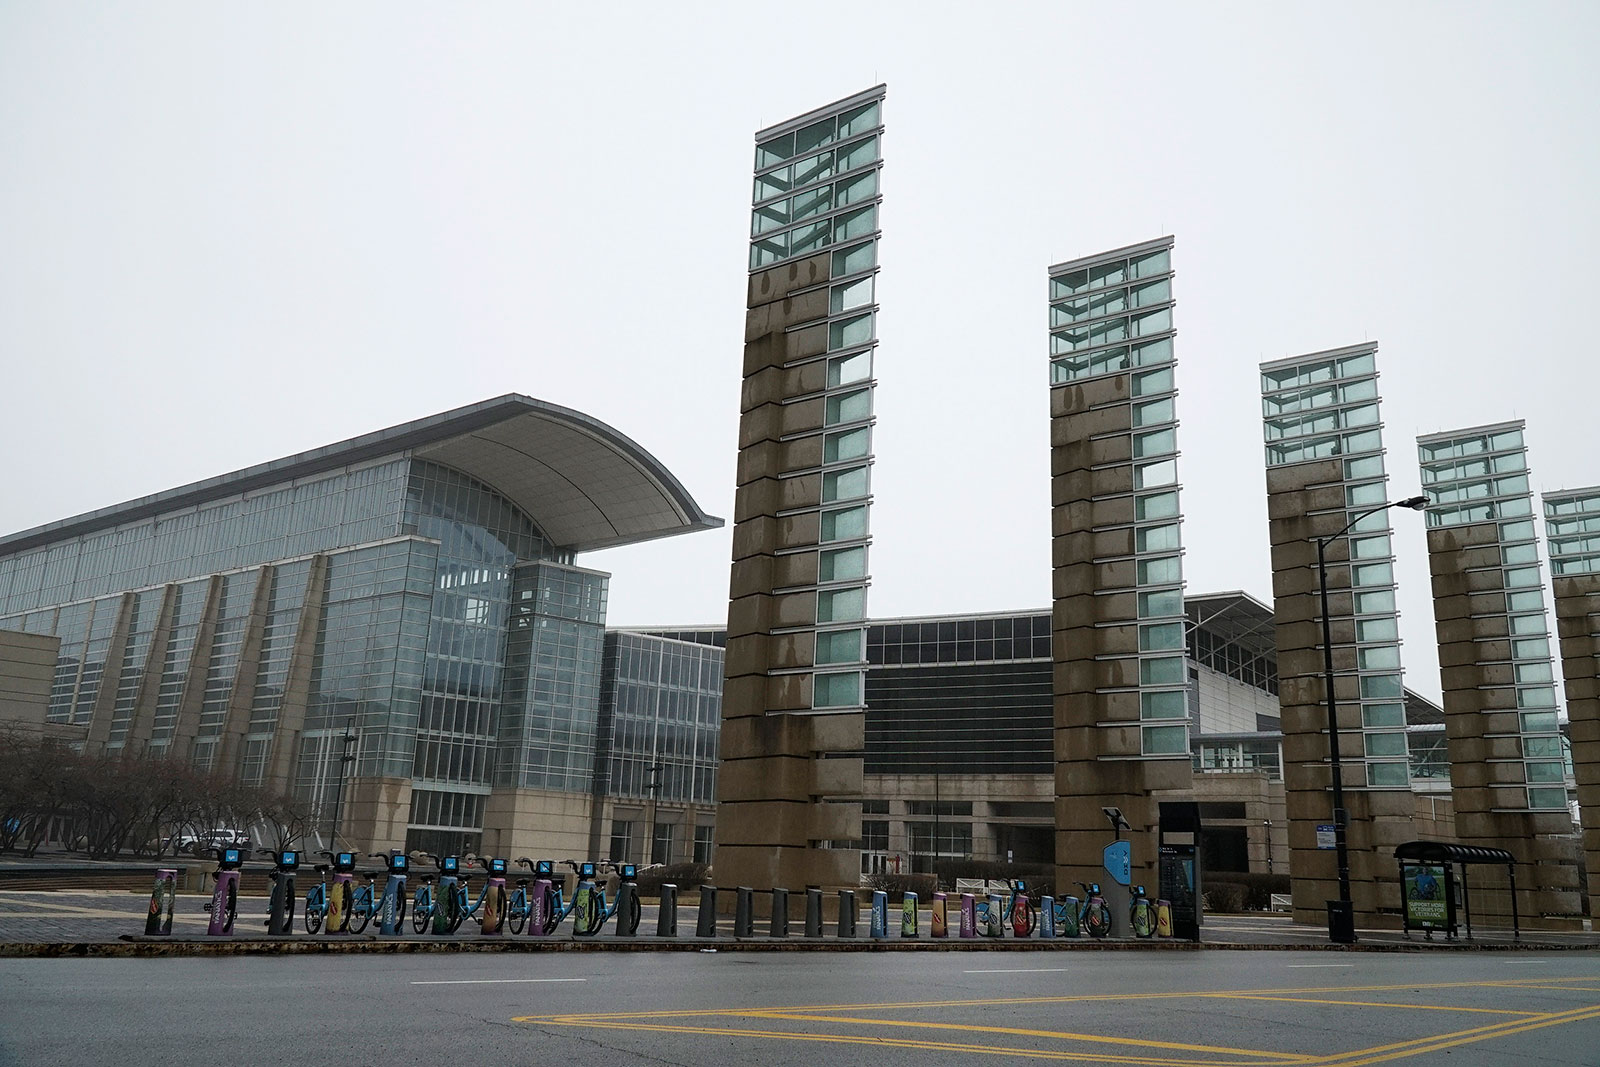 The exterior of the McCormick Place Convention Center in Chicago.